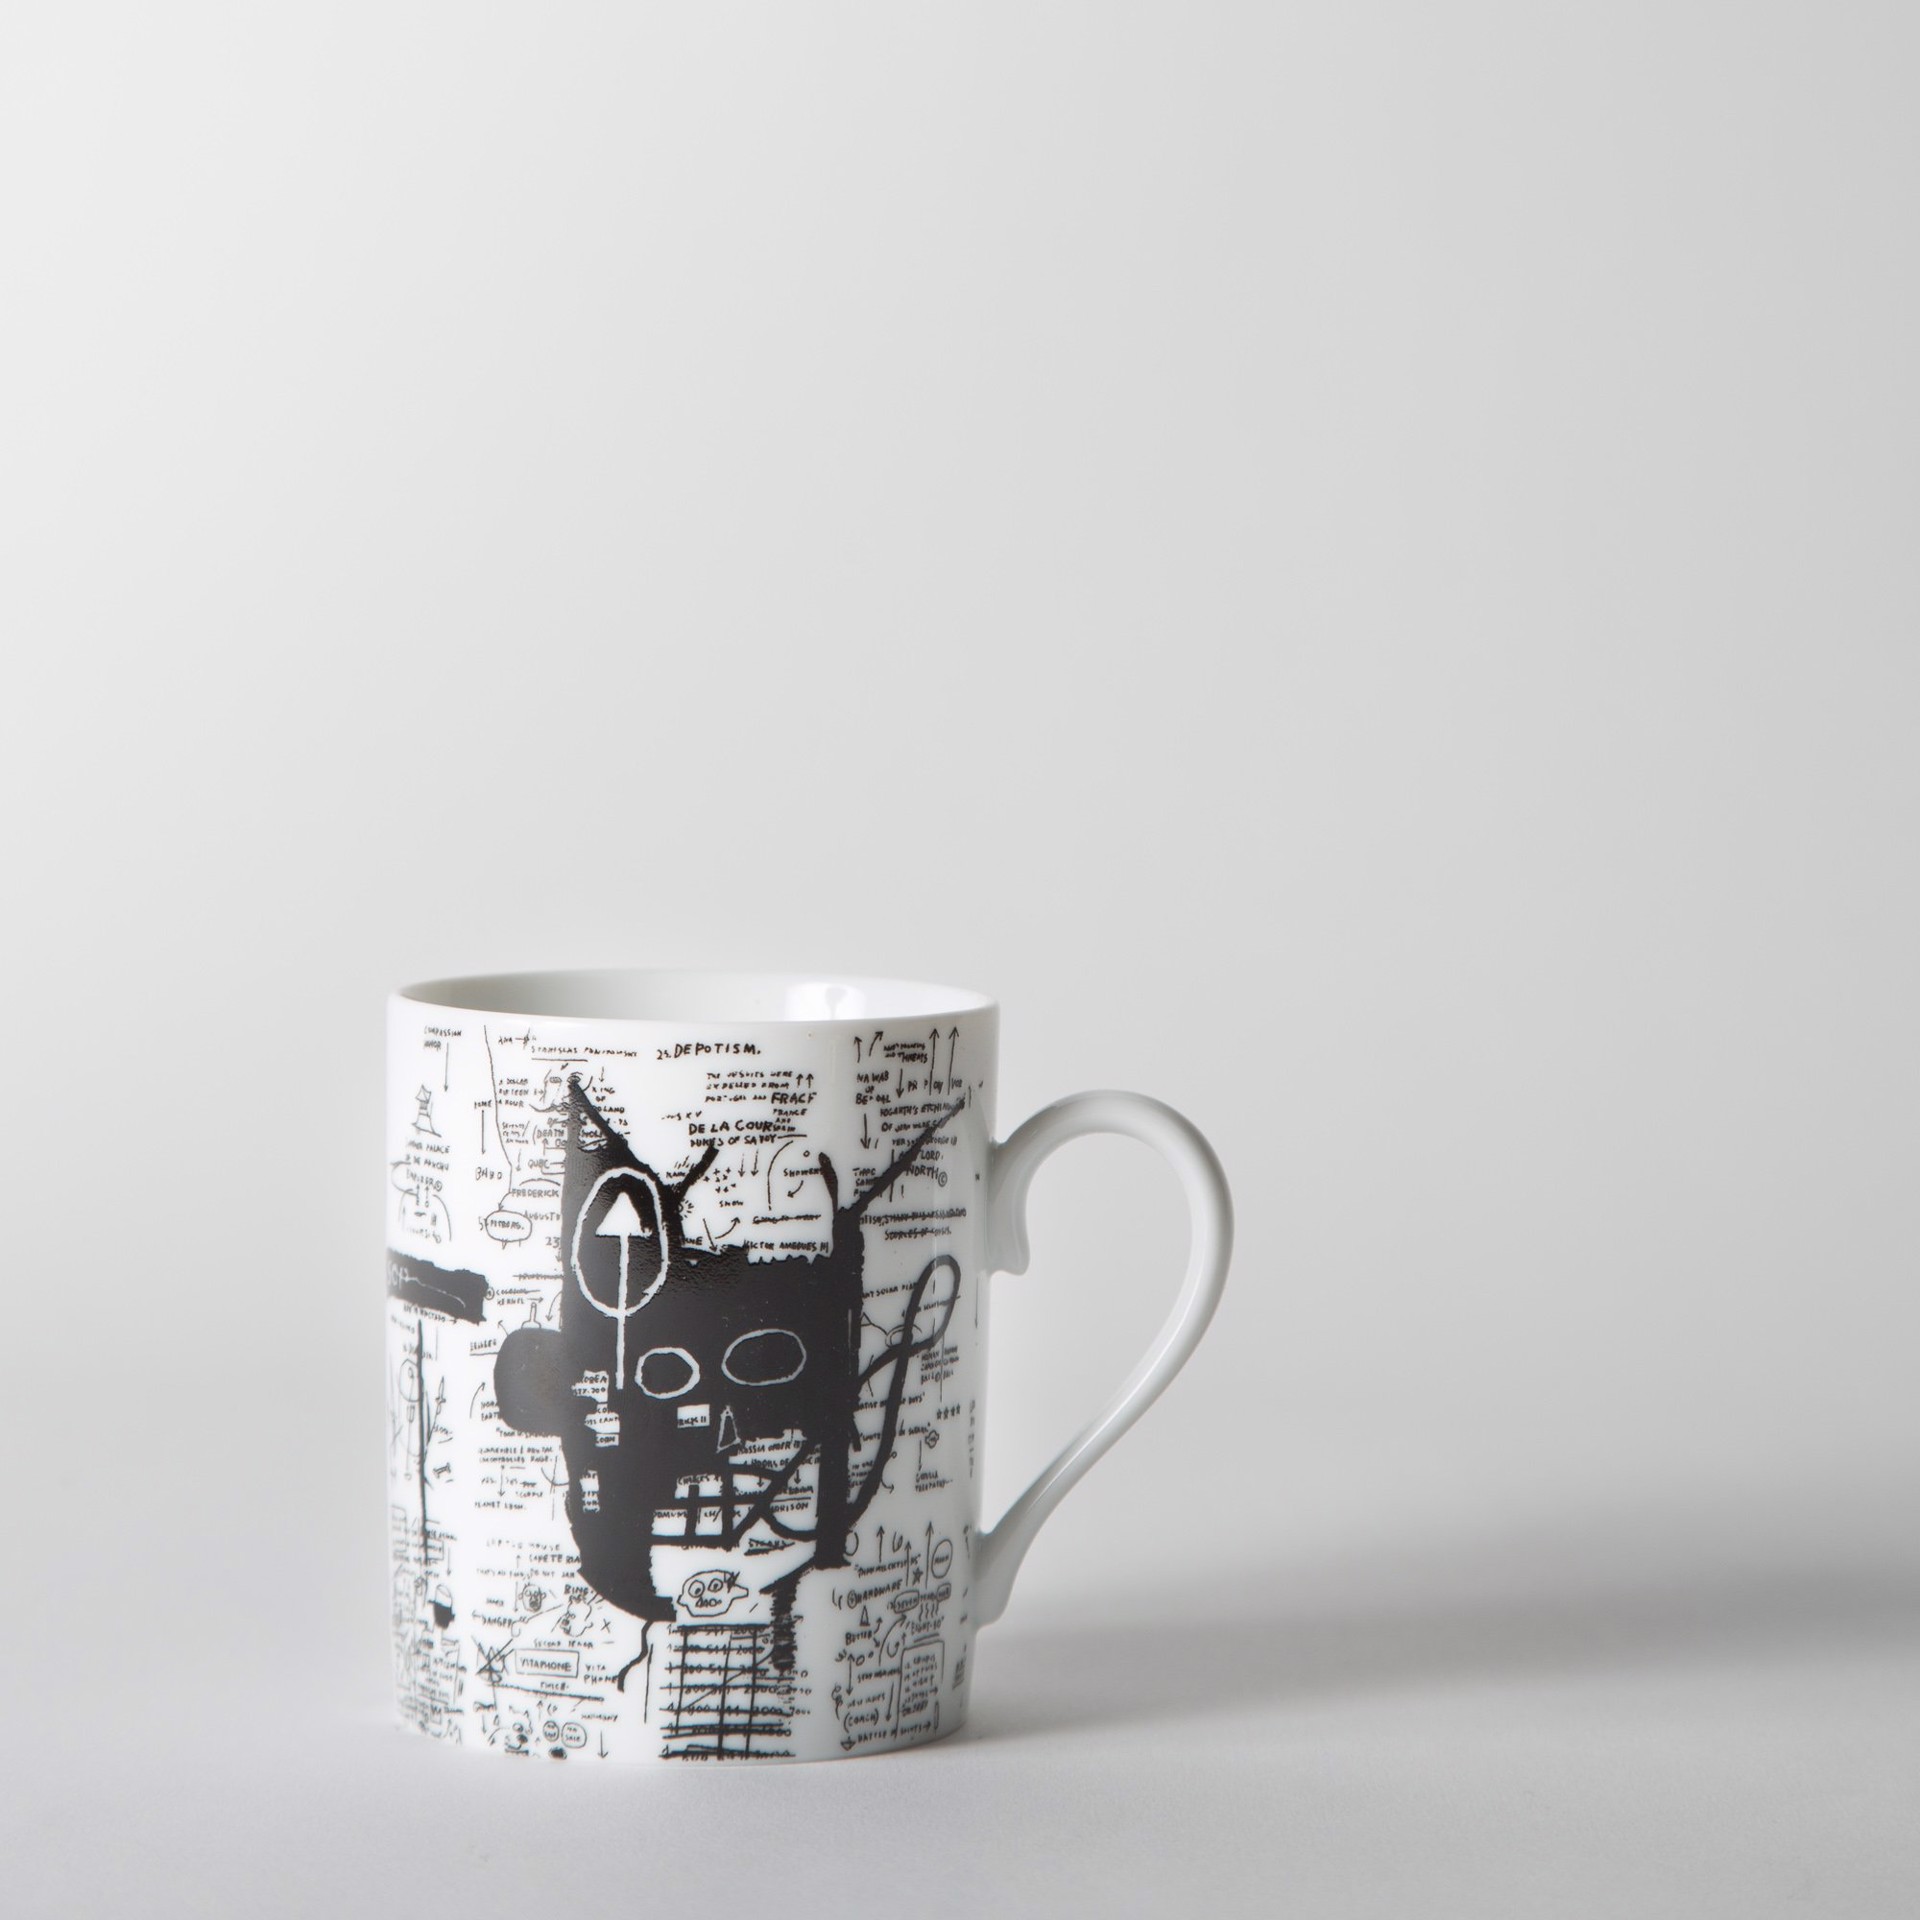 Return Of the Central Figure Mug by Jean-Michel Basquiat